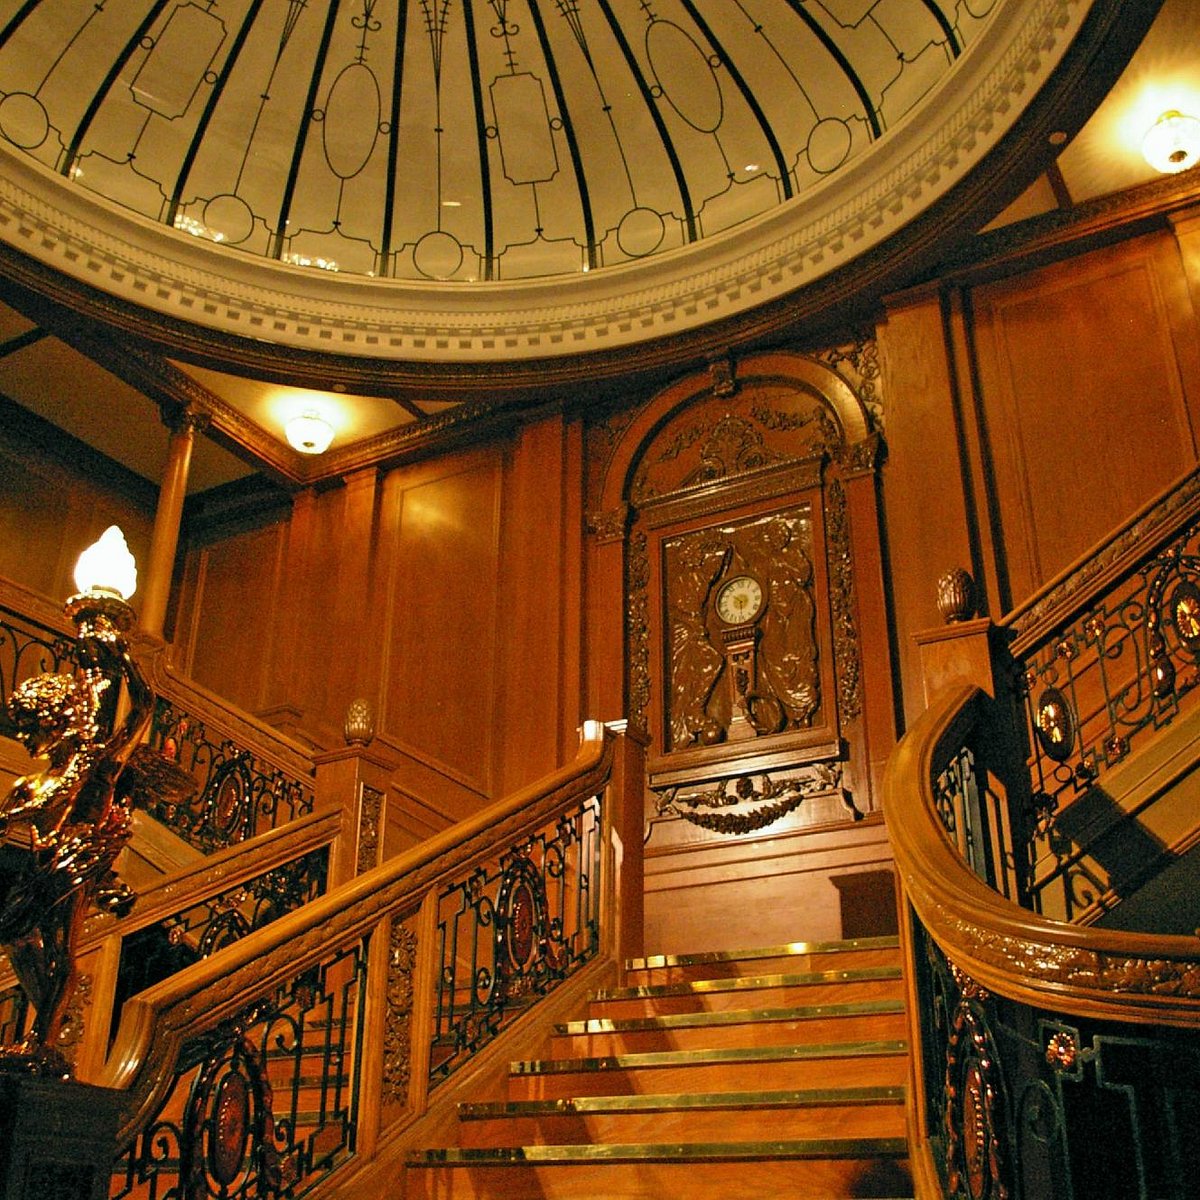 Take a look inside this immersive Titanic exhibition in Los